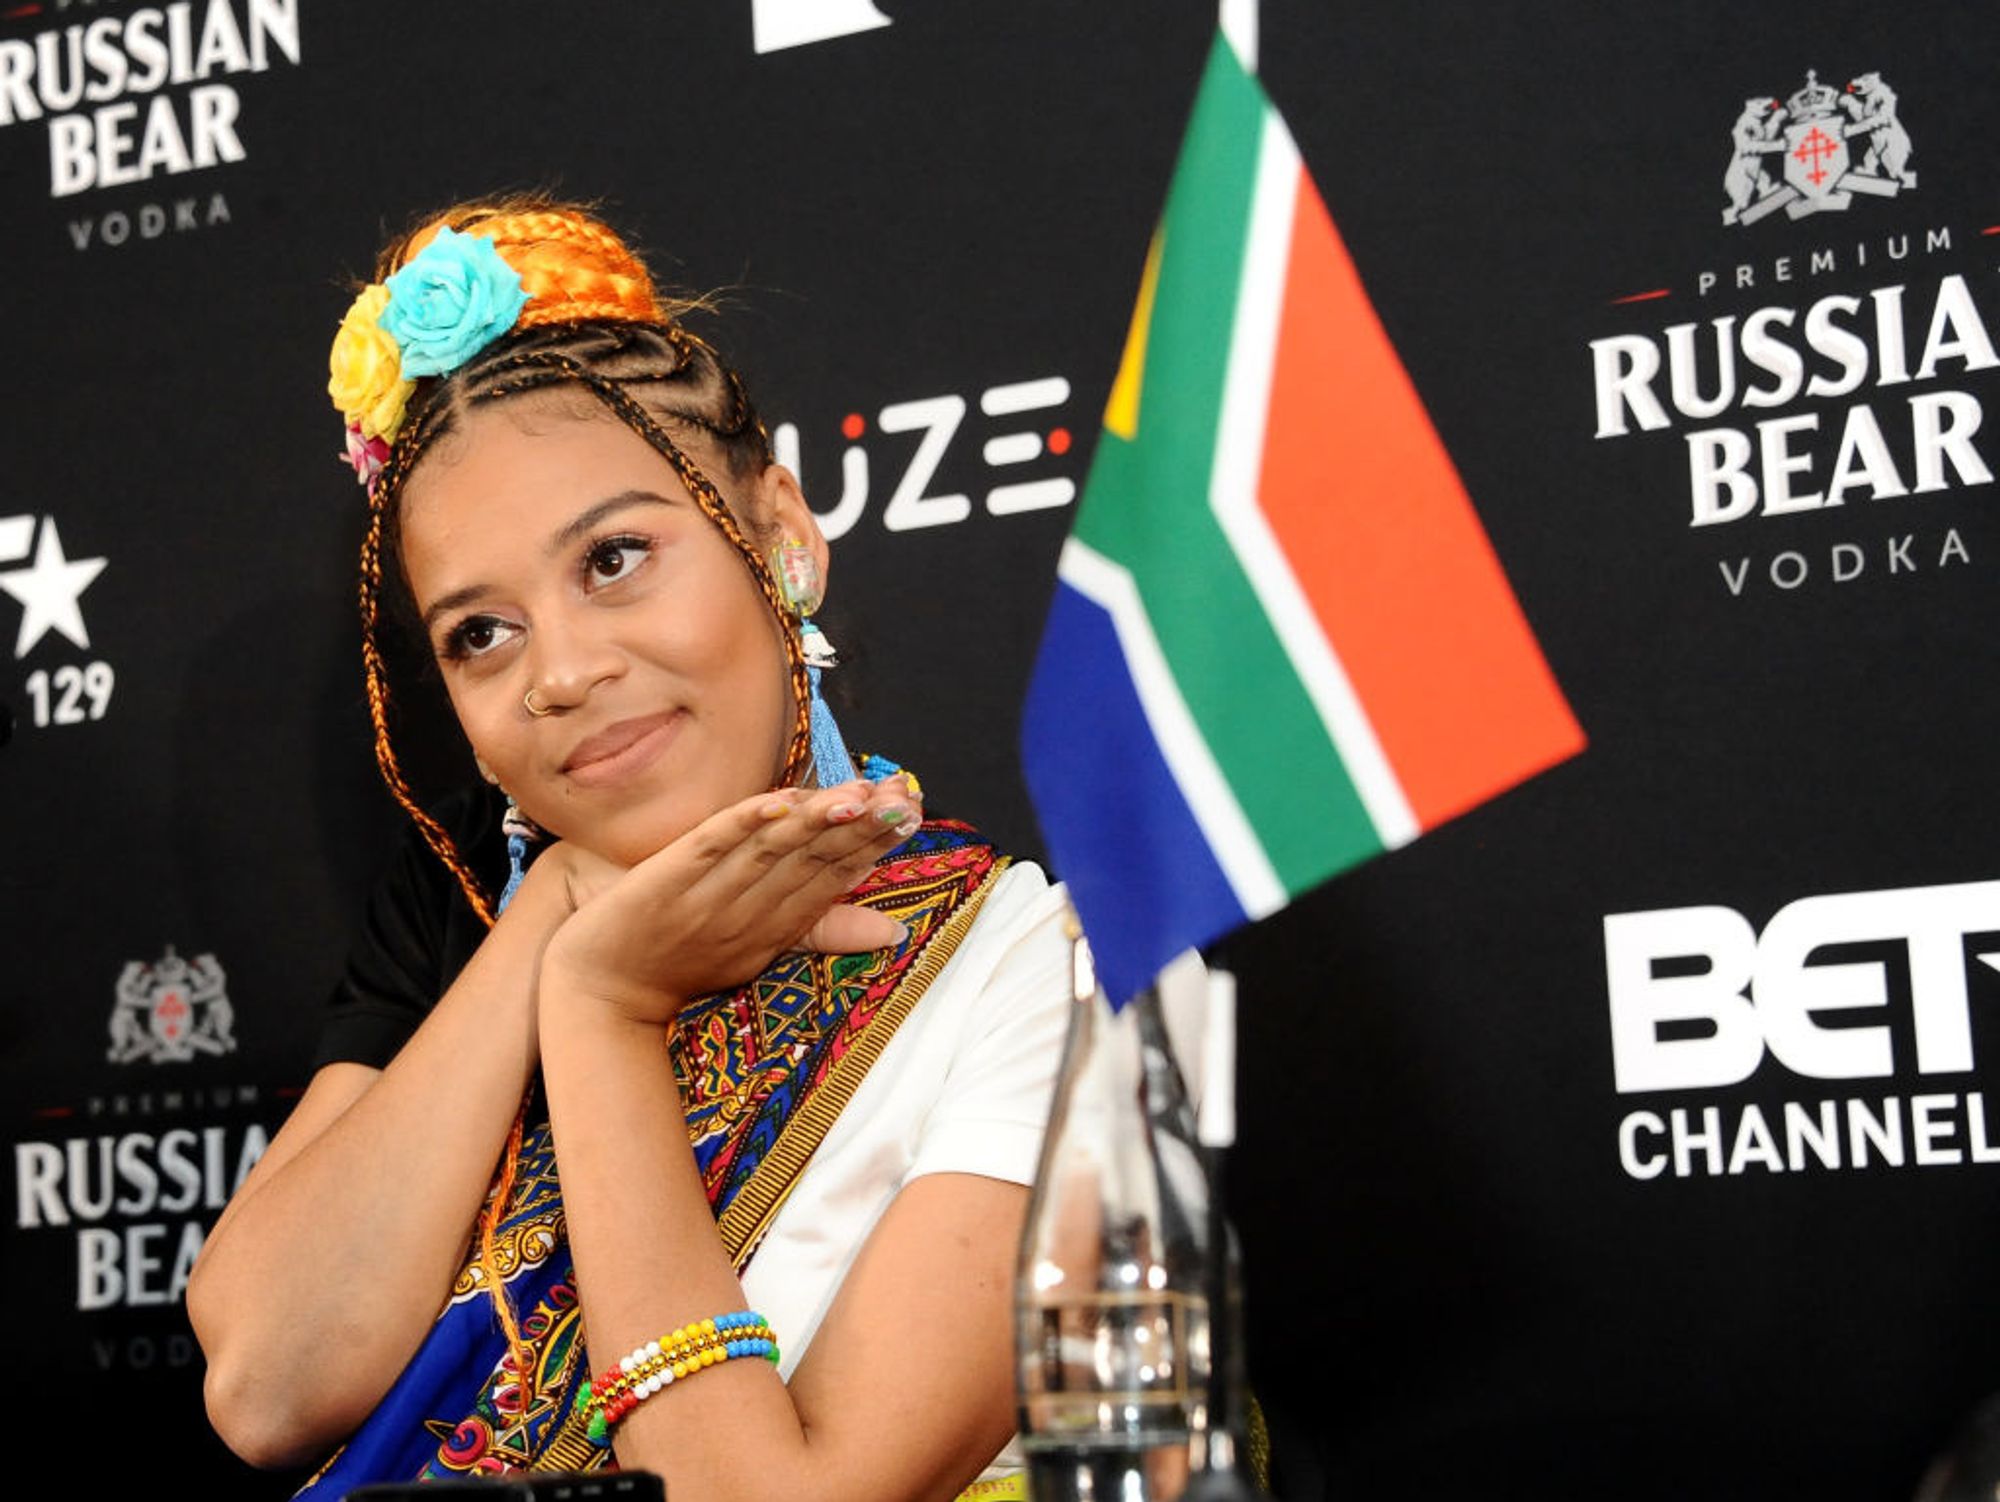 Sho Madjozi's Sister Has Passed Away in a Tragic Car Accident